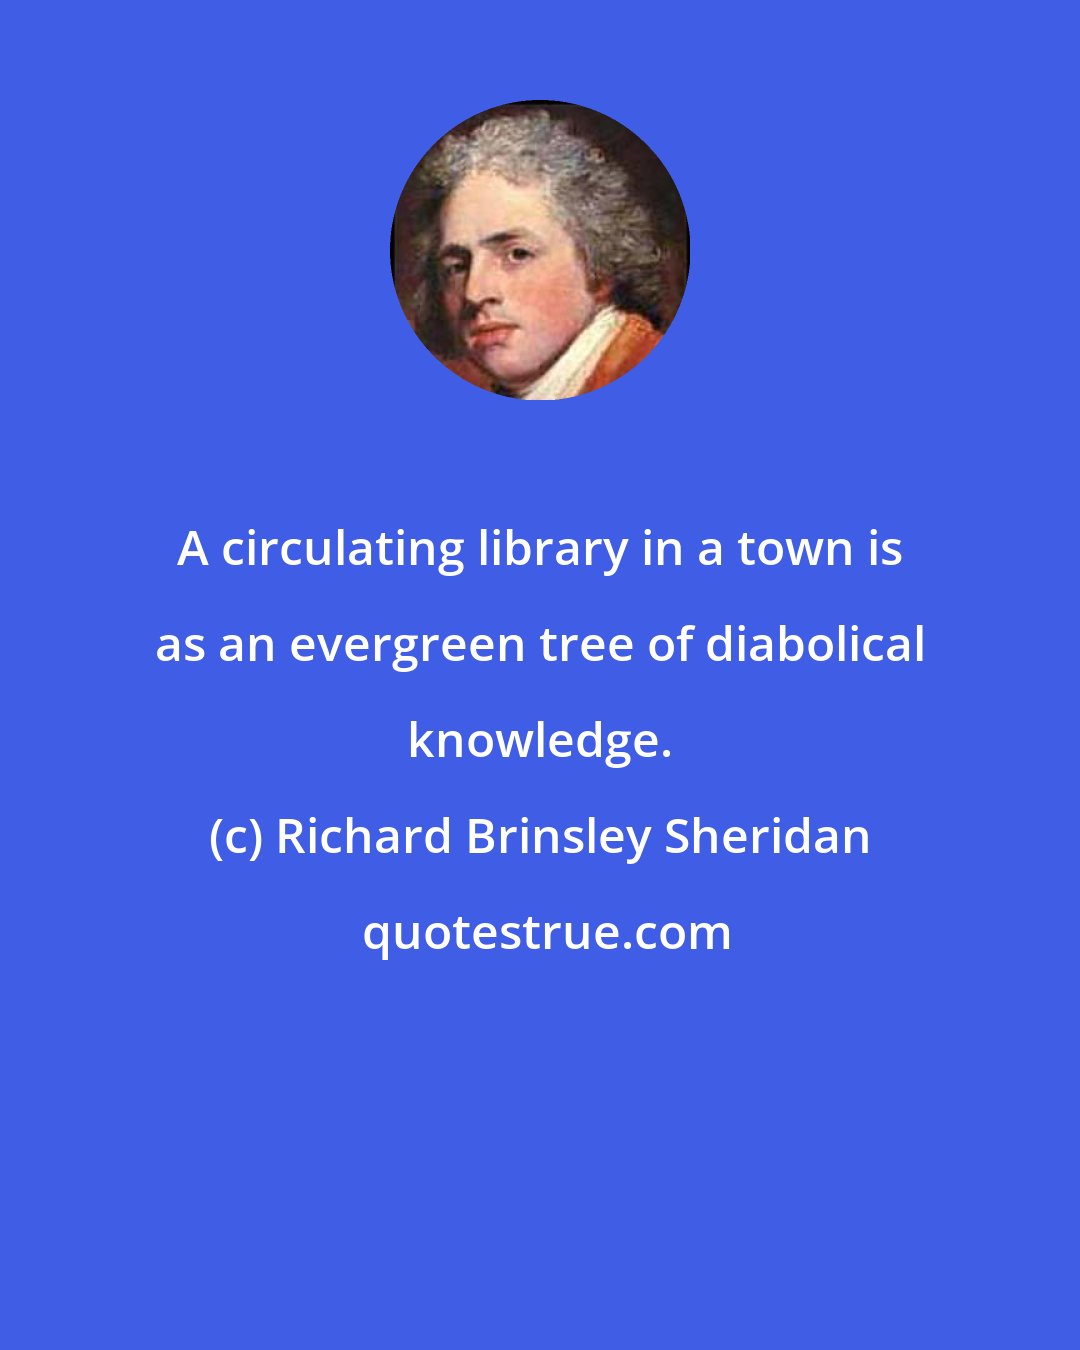 Richard Brinsley Sheridan: A circulating library in a town is as an evergreen tree of diabolical knowledge.